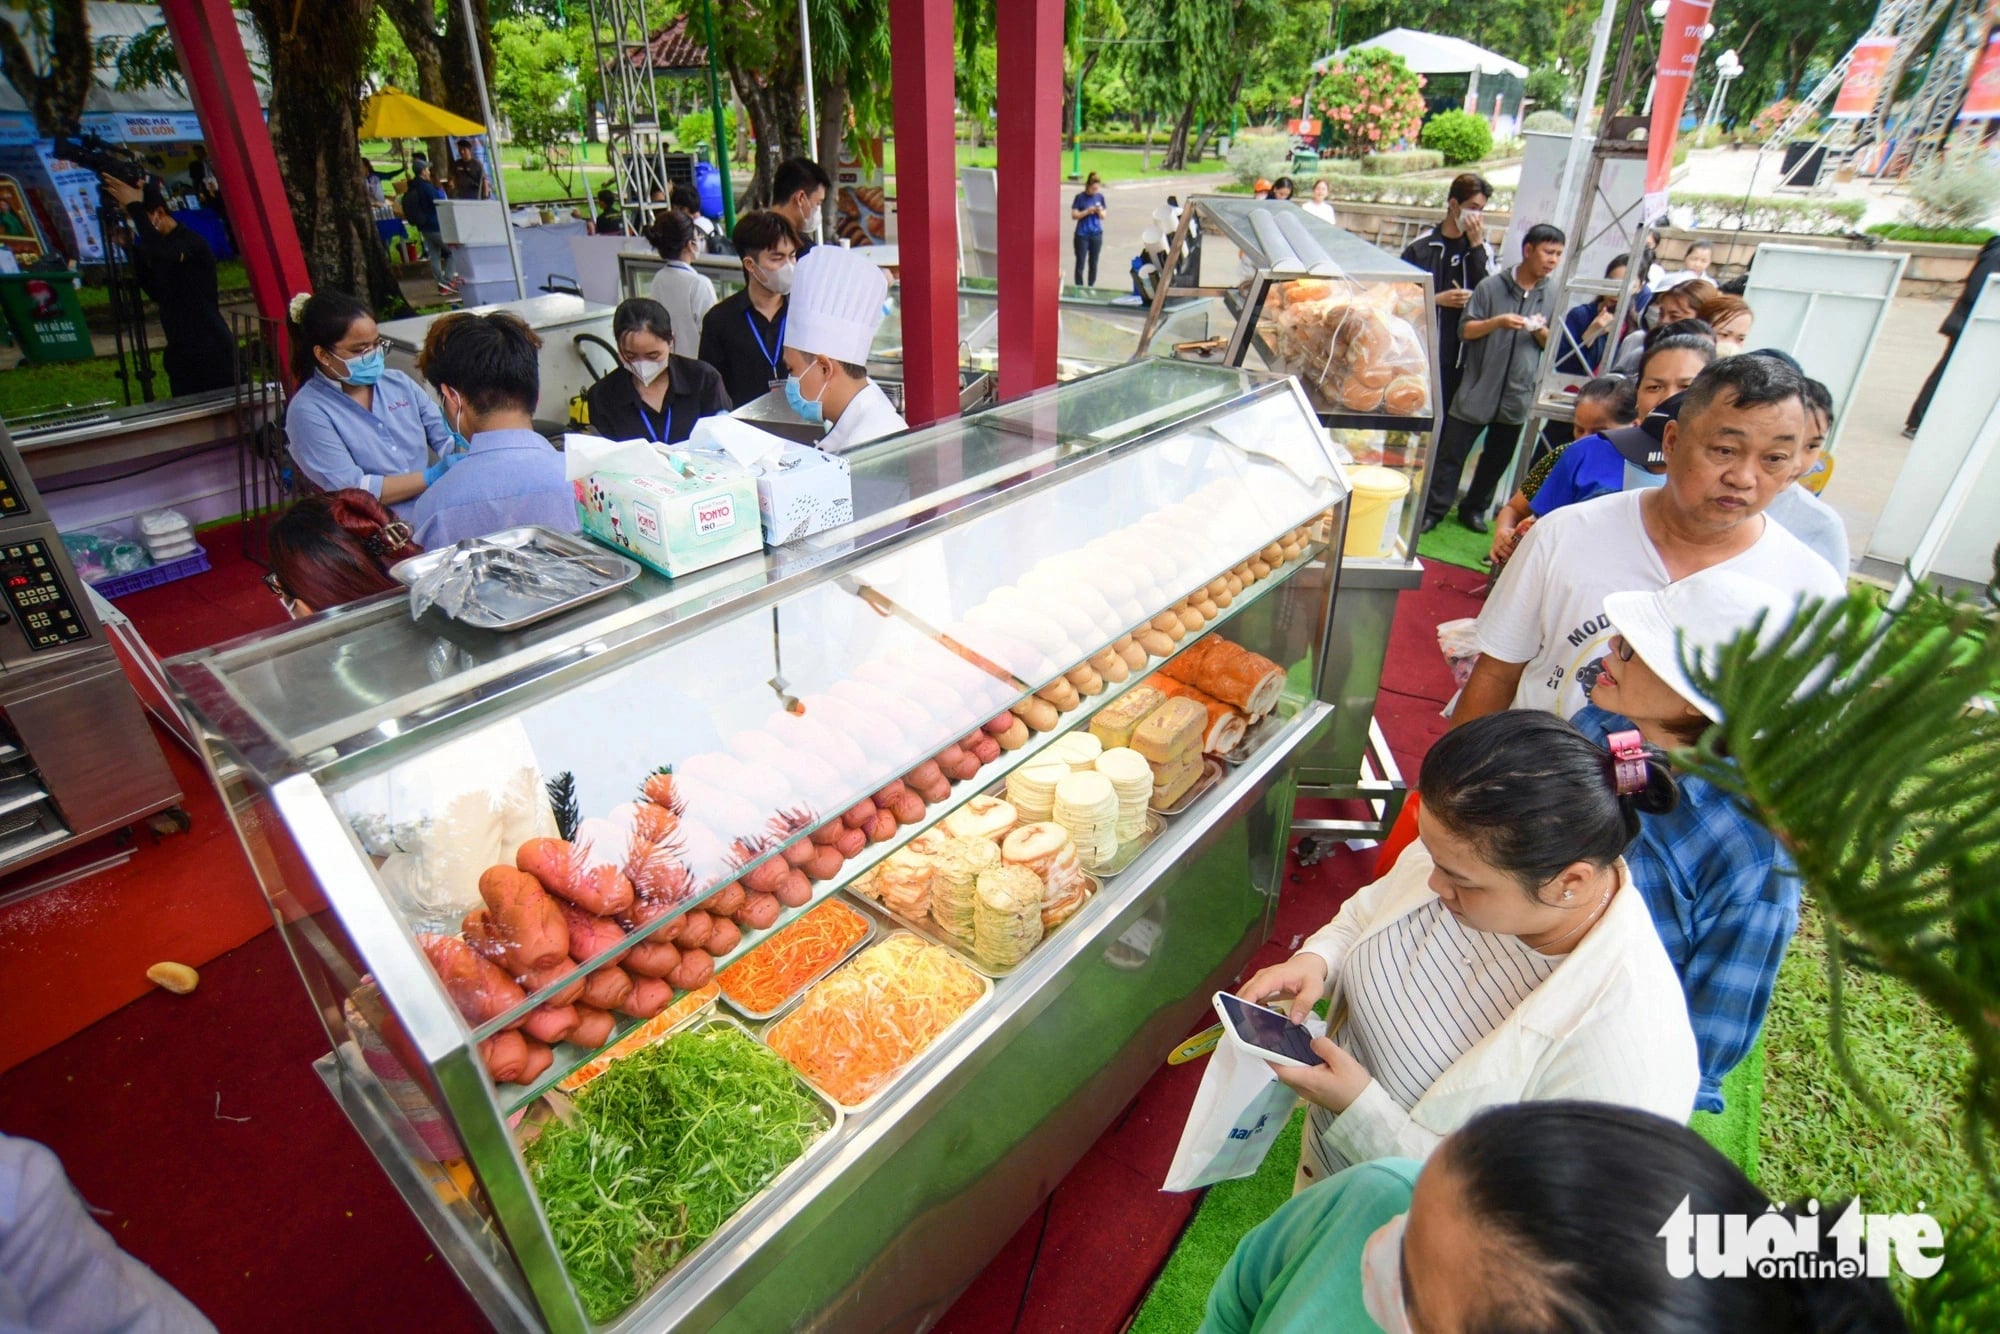 Visitors queue to sample free ‘banh mi' at the Vietnam Banh Mi Festival at Le Van Tam Park in District 1, Ho Chi Minh City on May 17. Photo: Quang Dinh / Tuoi Tre